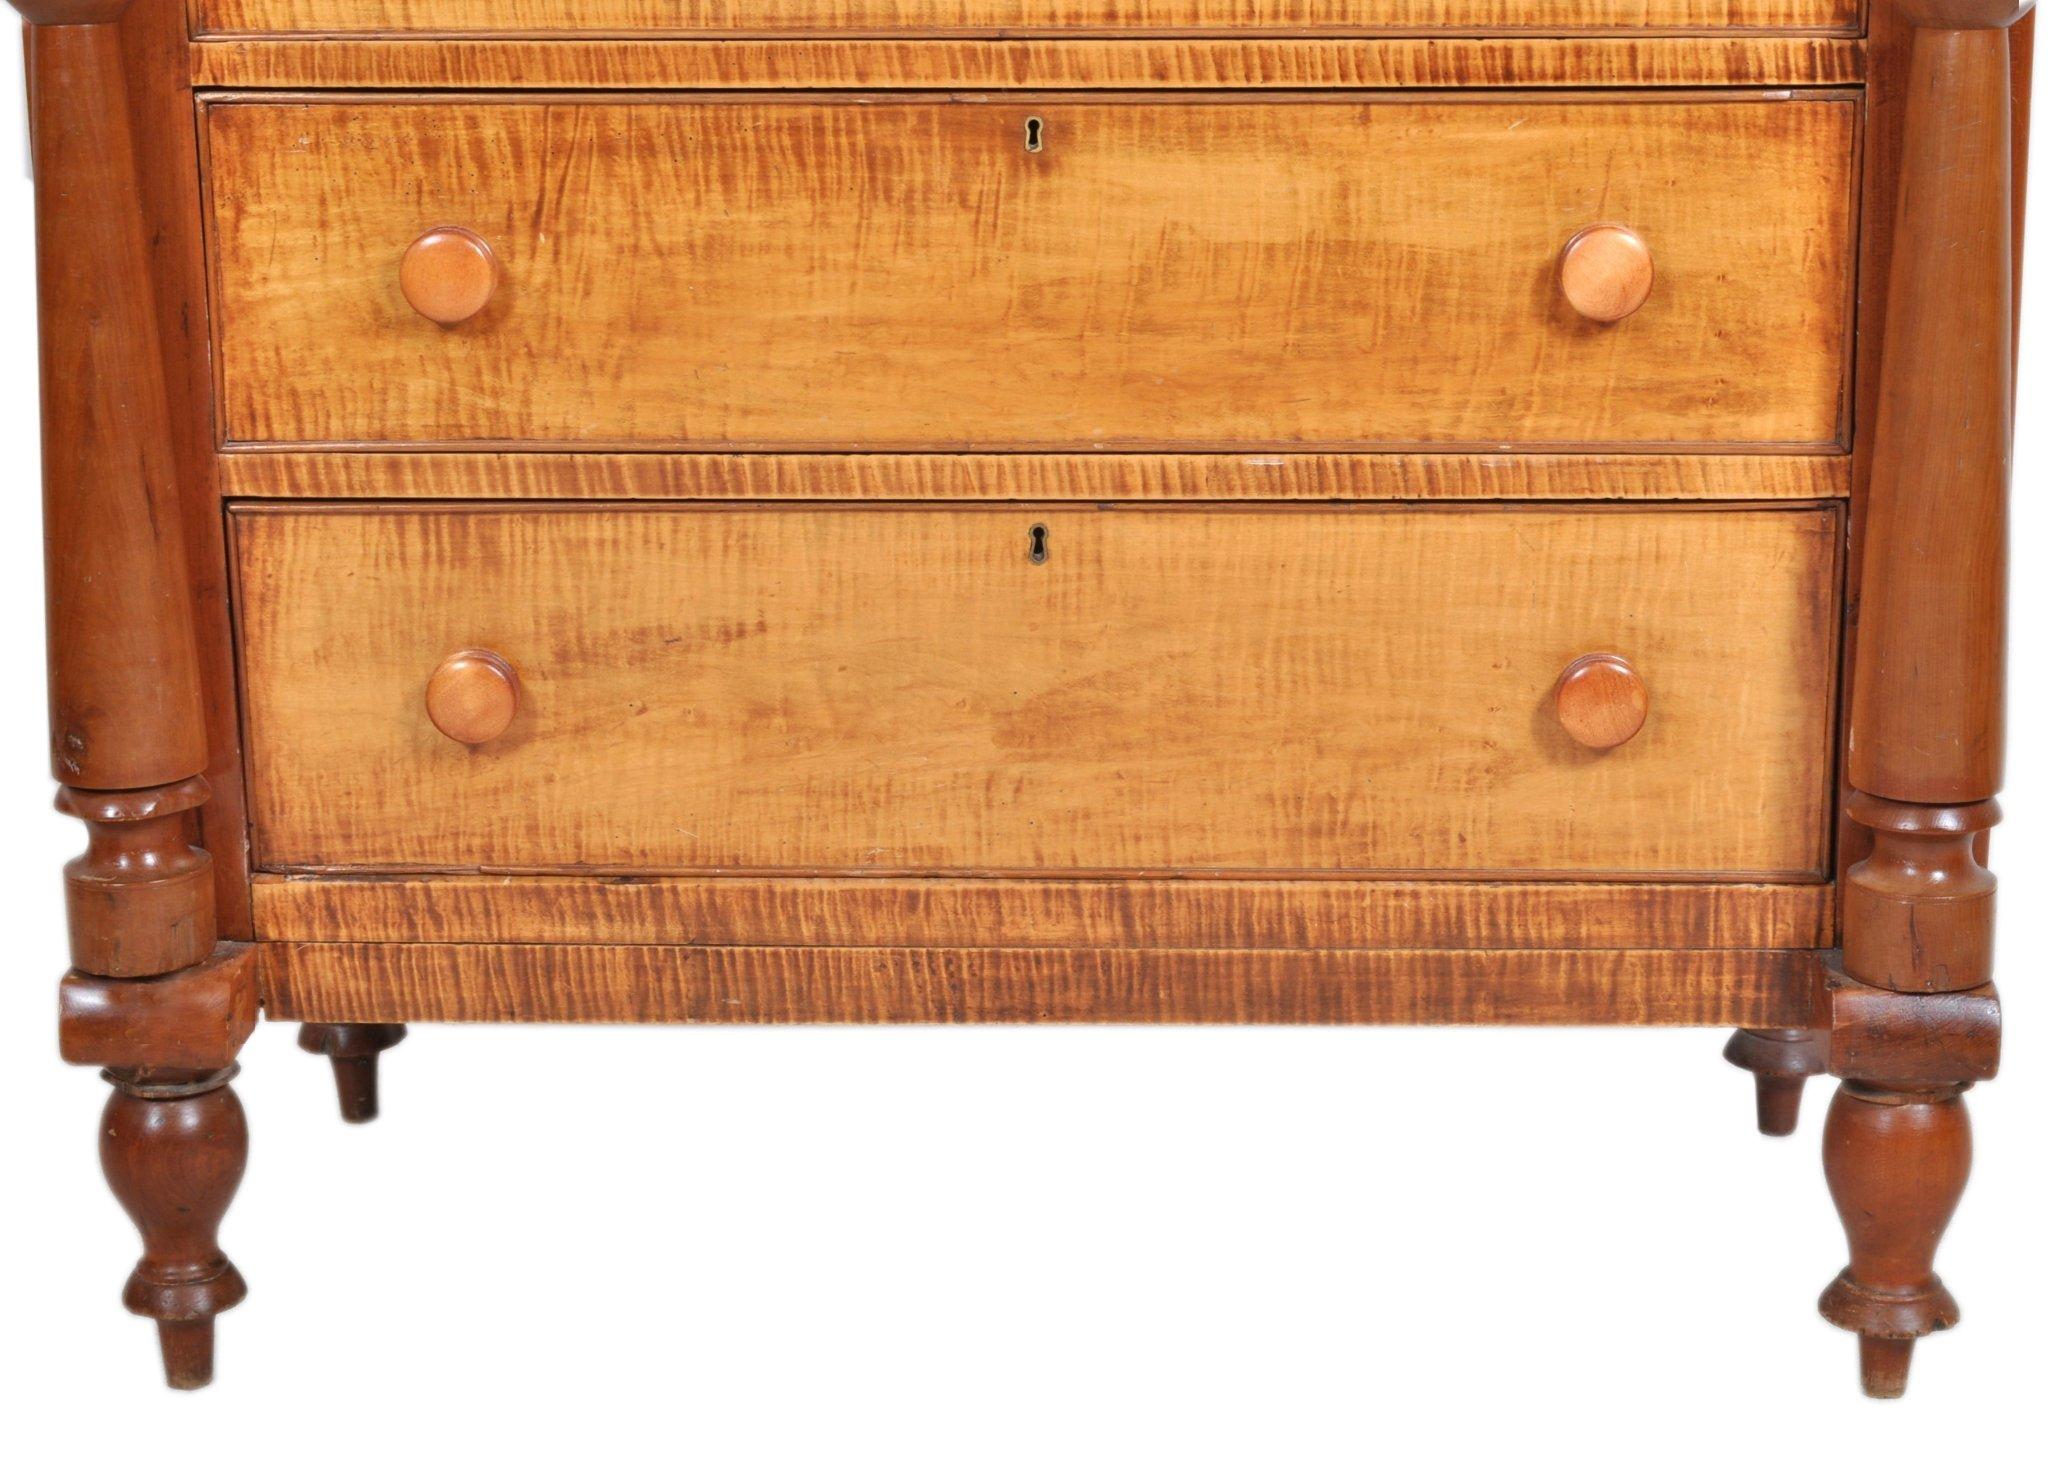 19th Century Antique Pennsylvanian 'Tiger Maple' Chest of Drawers, circa 1840